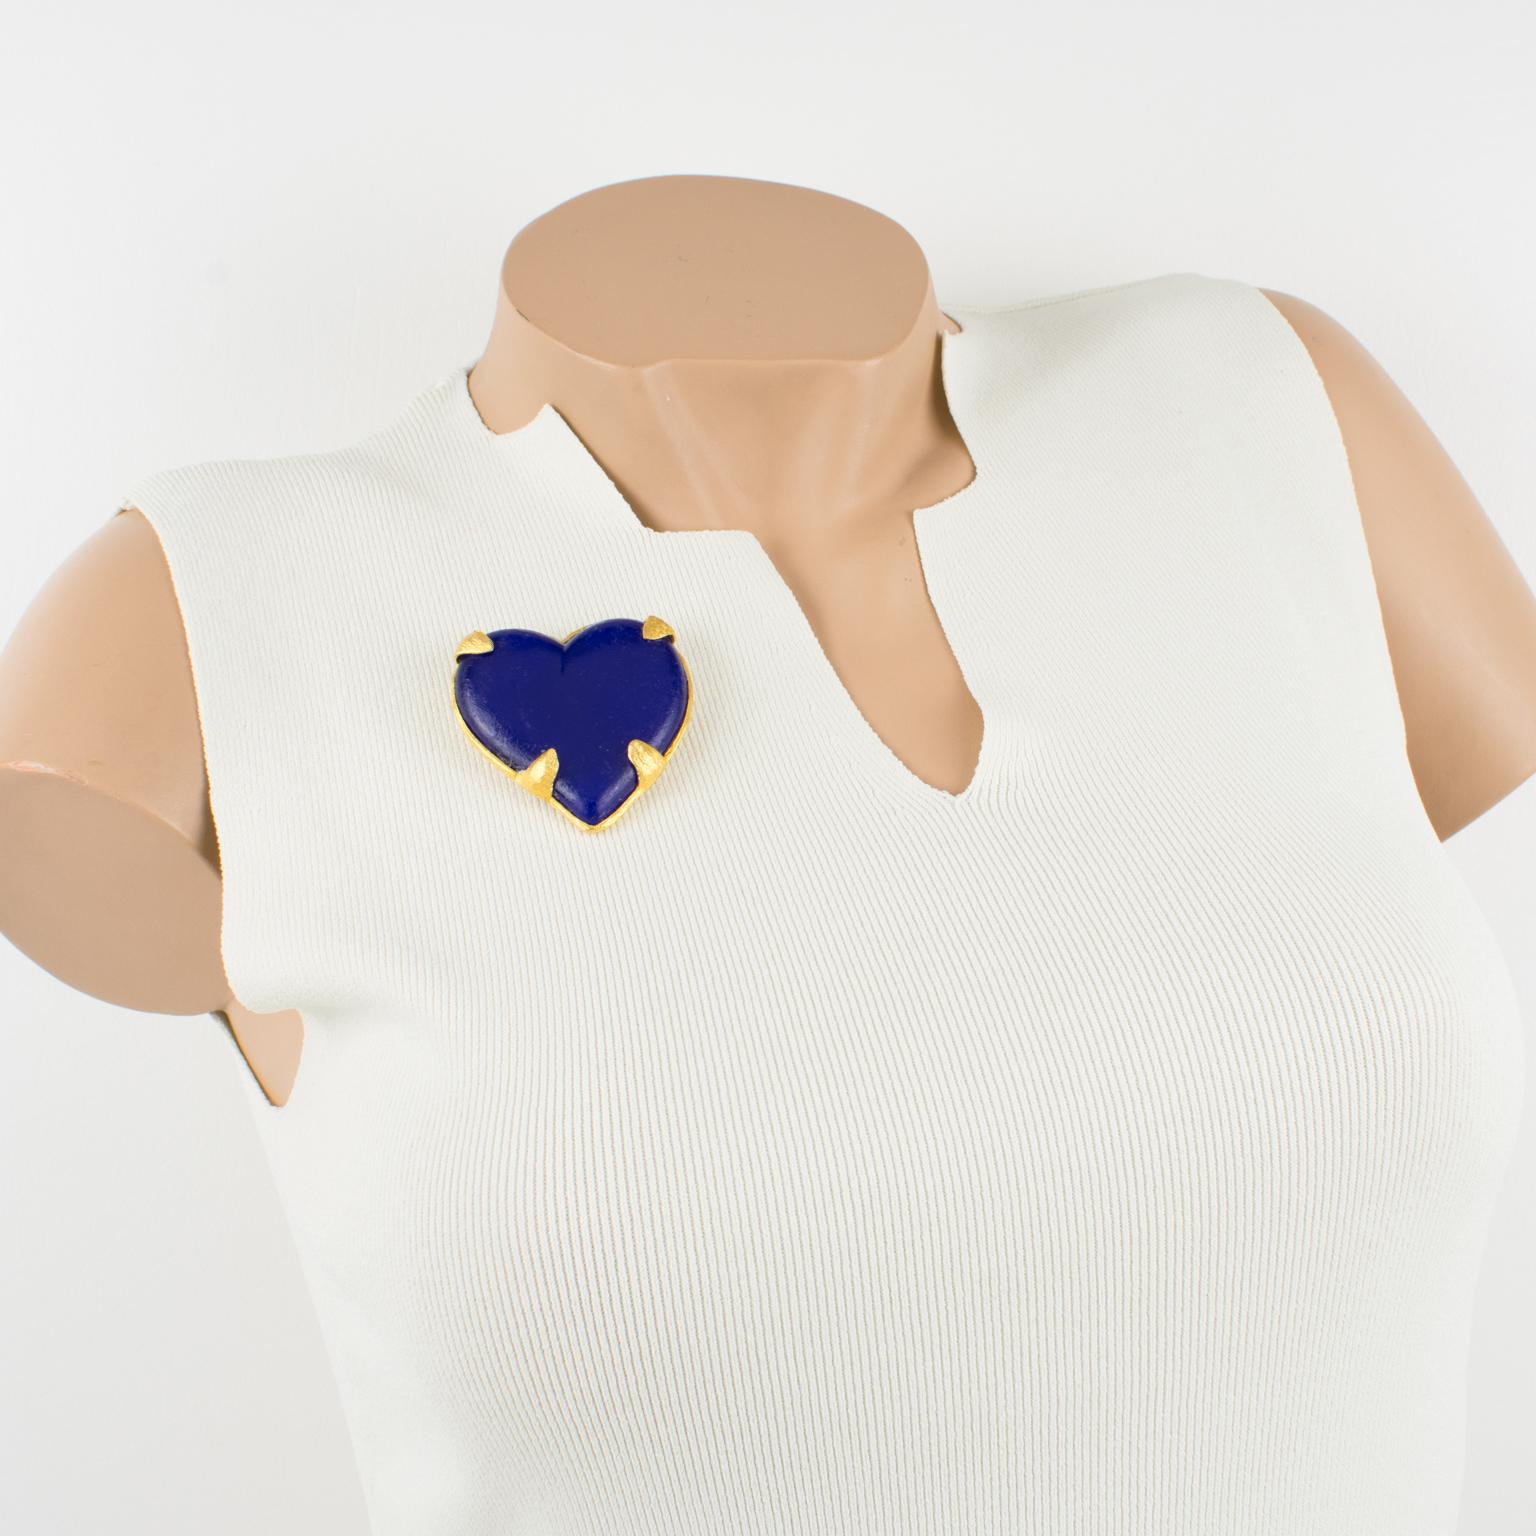 This stunning Edouard Rambaud Paris heart pin brooch features a dimensional oversized heart shape with gilded metal framing and a mat finish aspect topped with cobalt blue resin heart-cabochon. The pin has a security closing clasp at the back and